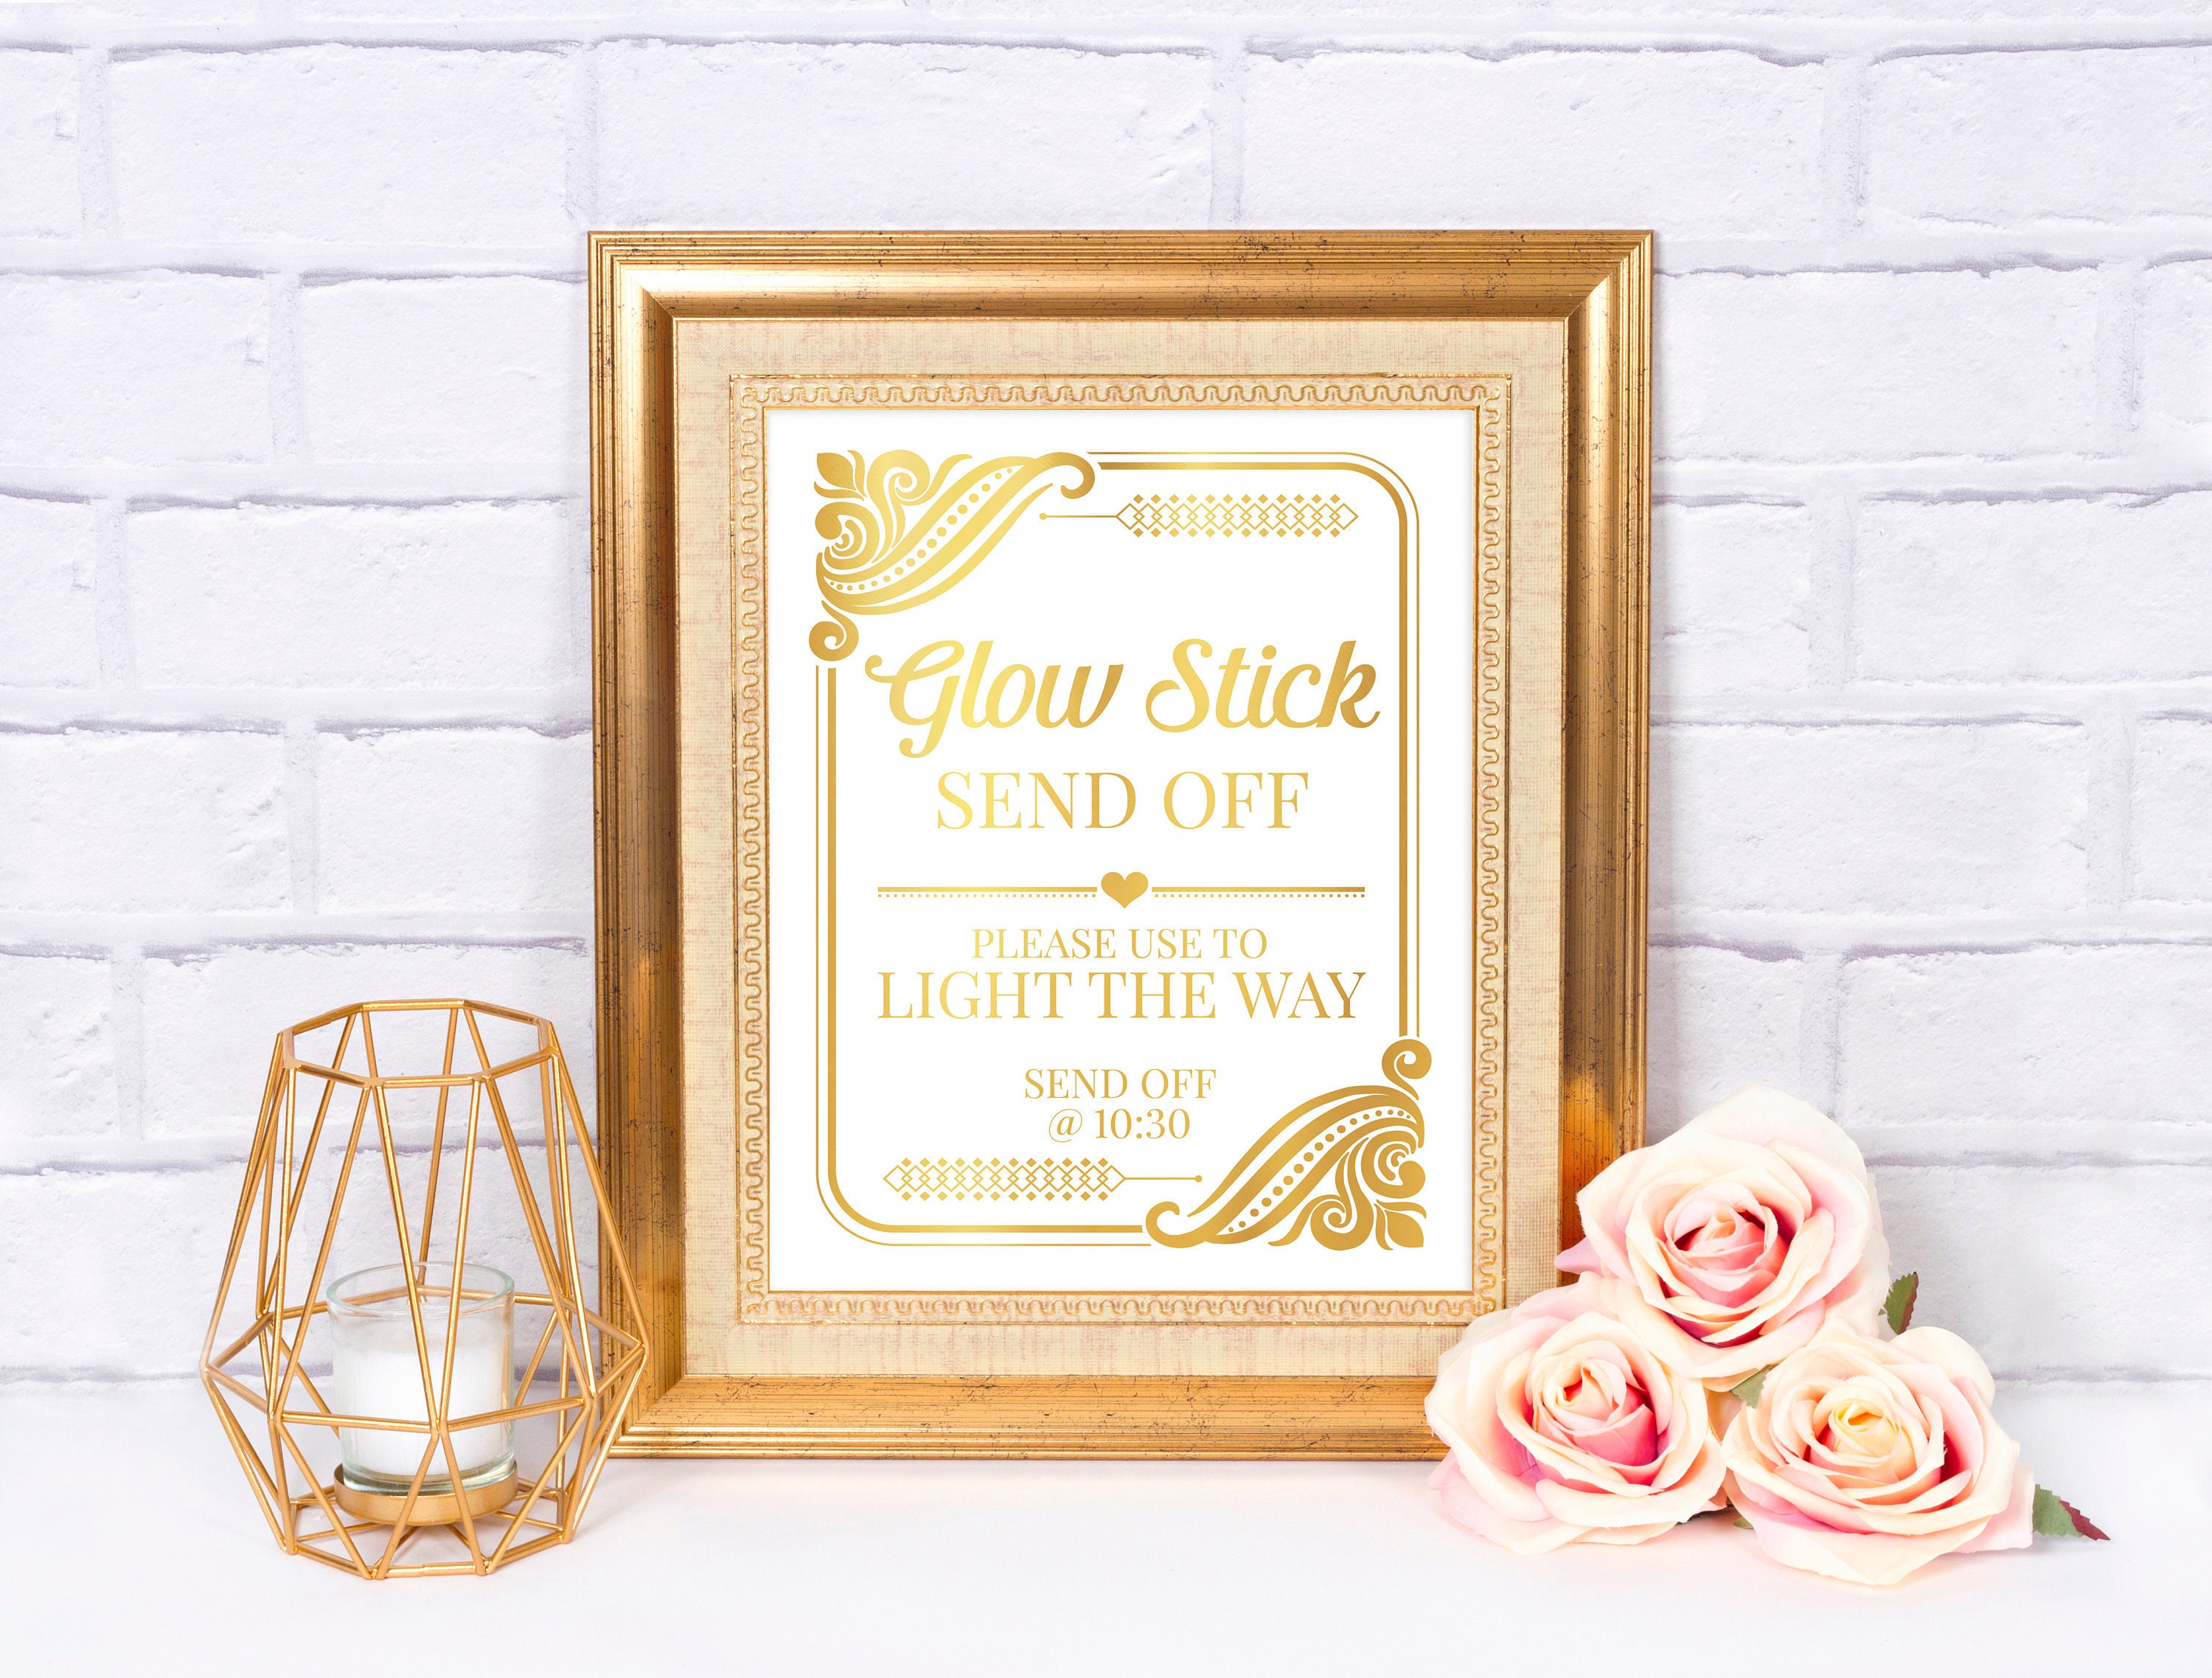 Let Love Glow Sign, Sparklers Sign, Glow Stick Wedding Sign Template, Glow  Sticks Send off Template, Wedding Glow Sticks Sign Celine 